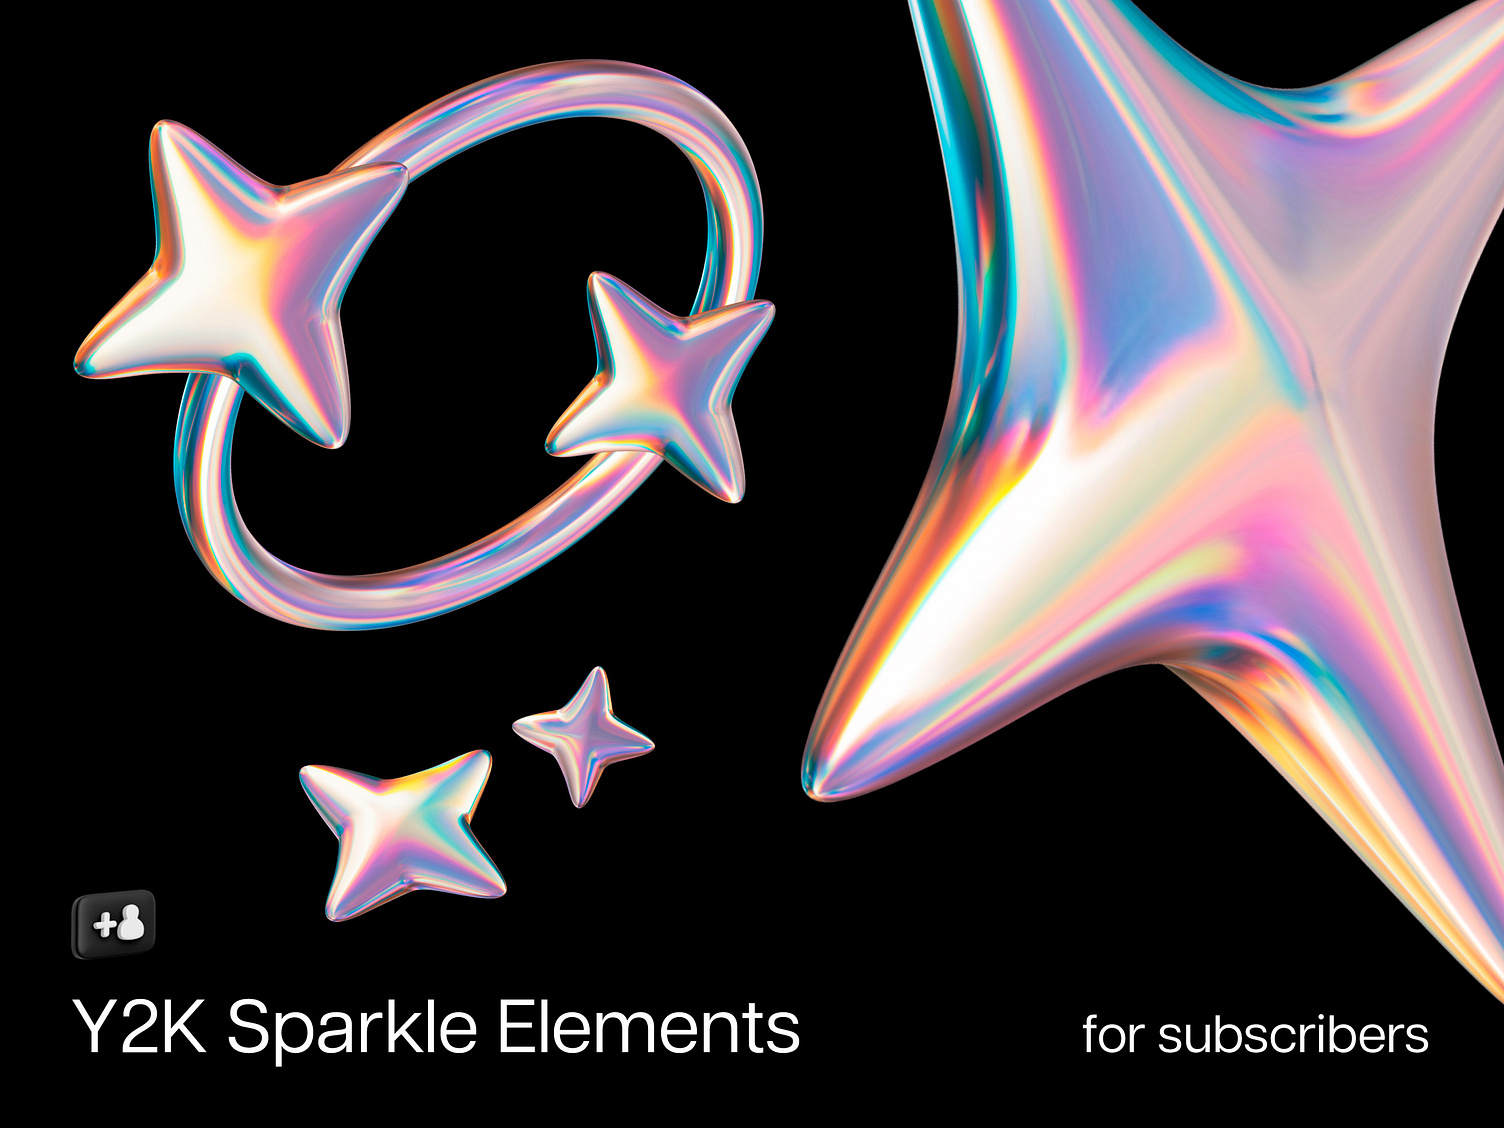 Y2K Sparkle Elements by Pixelbuddha on Dribbble